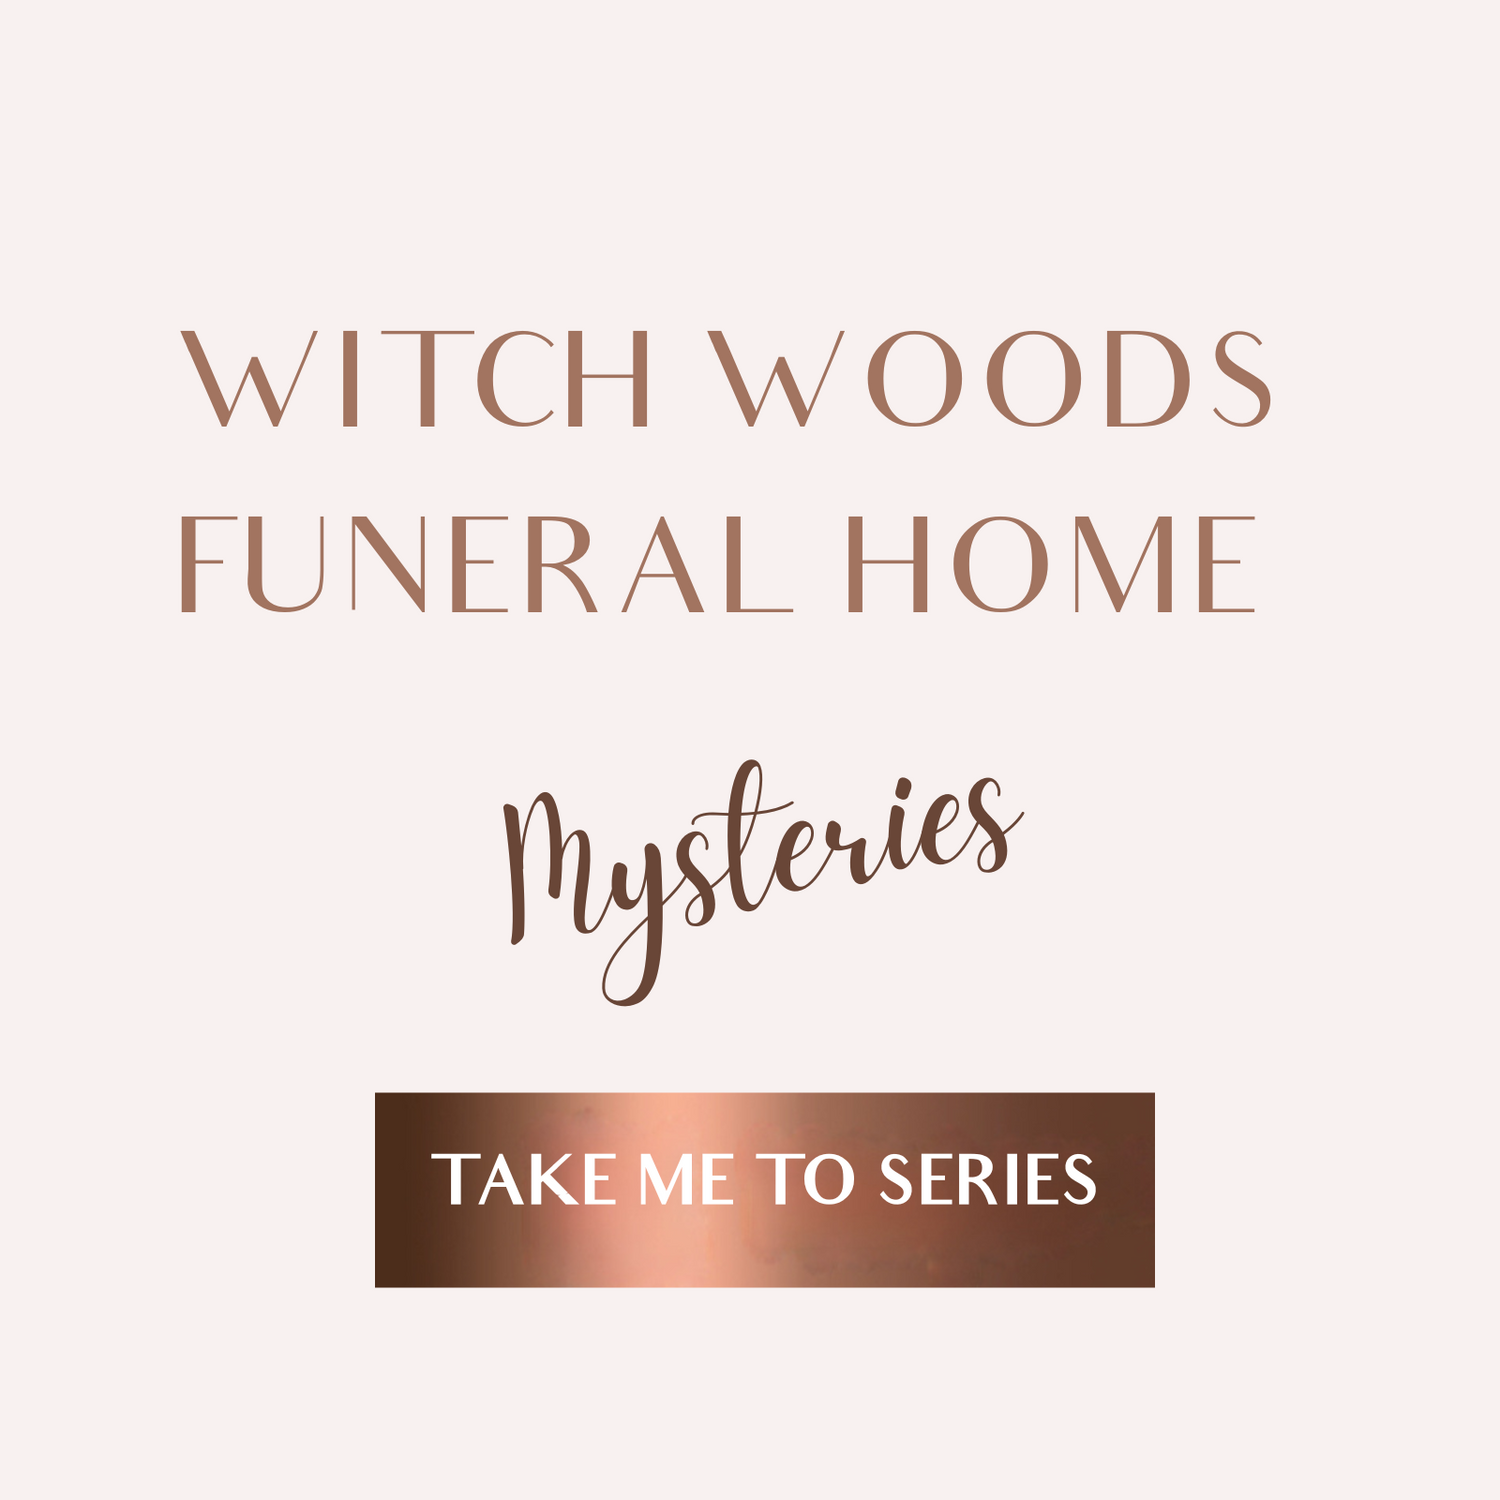 Witch Woods Funeral Home Series EBOOKS